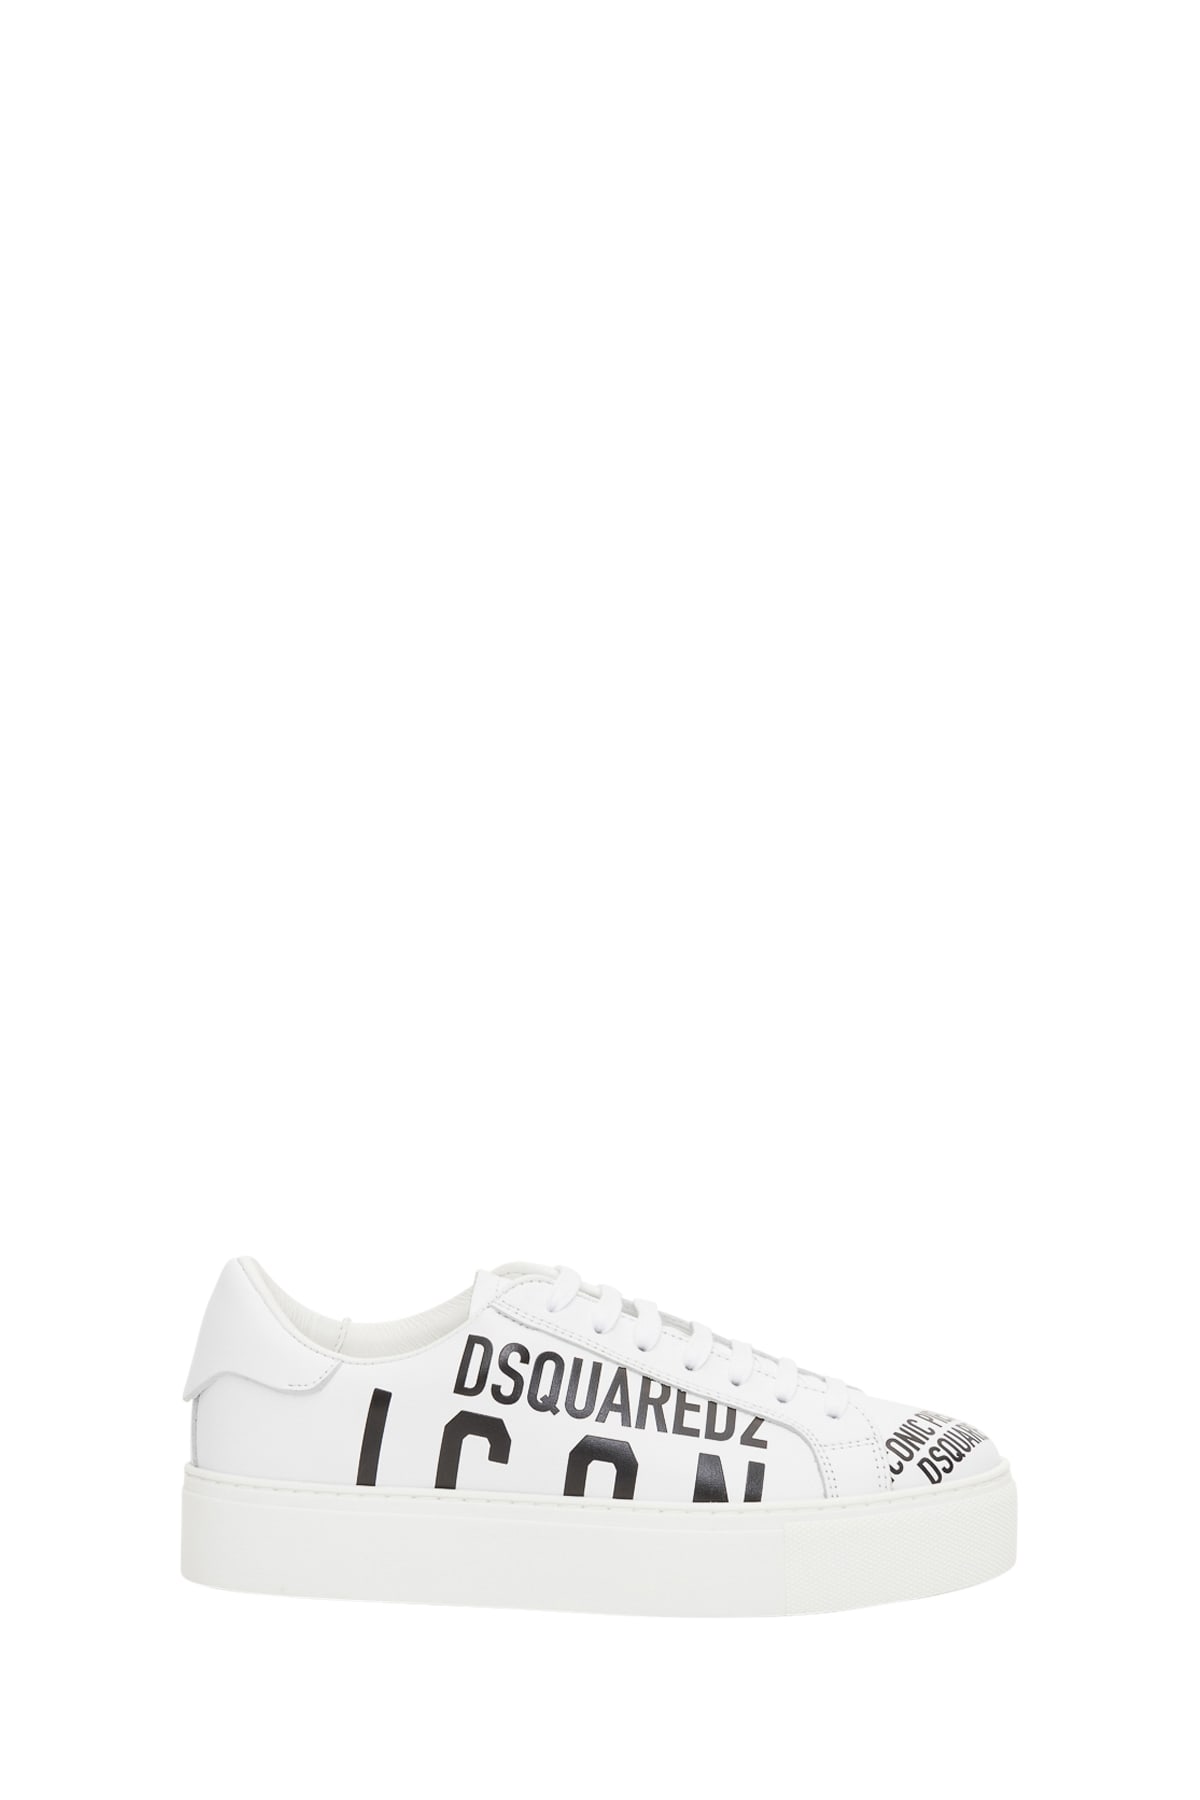 DSQUARED2 ICON trainers,11244373